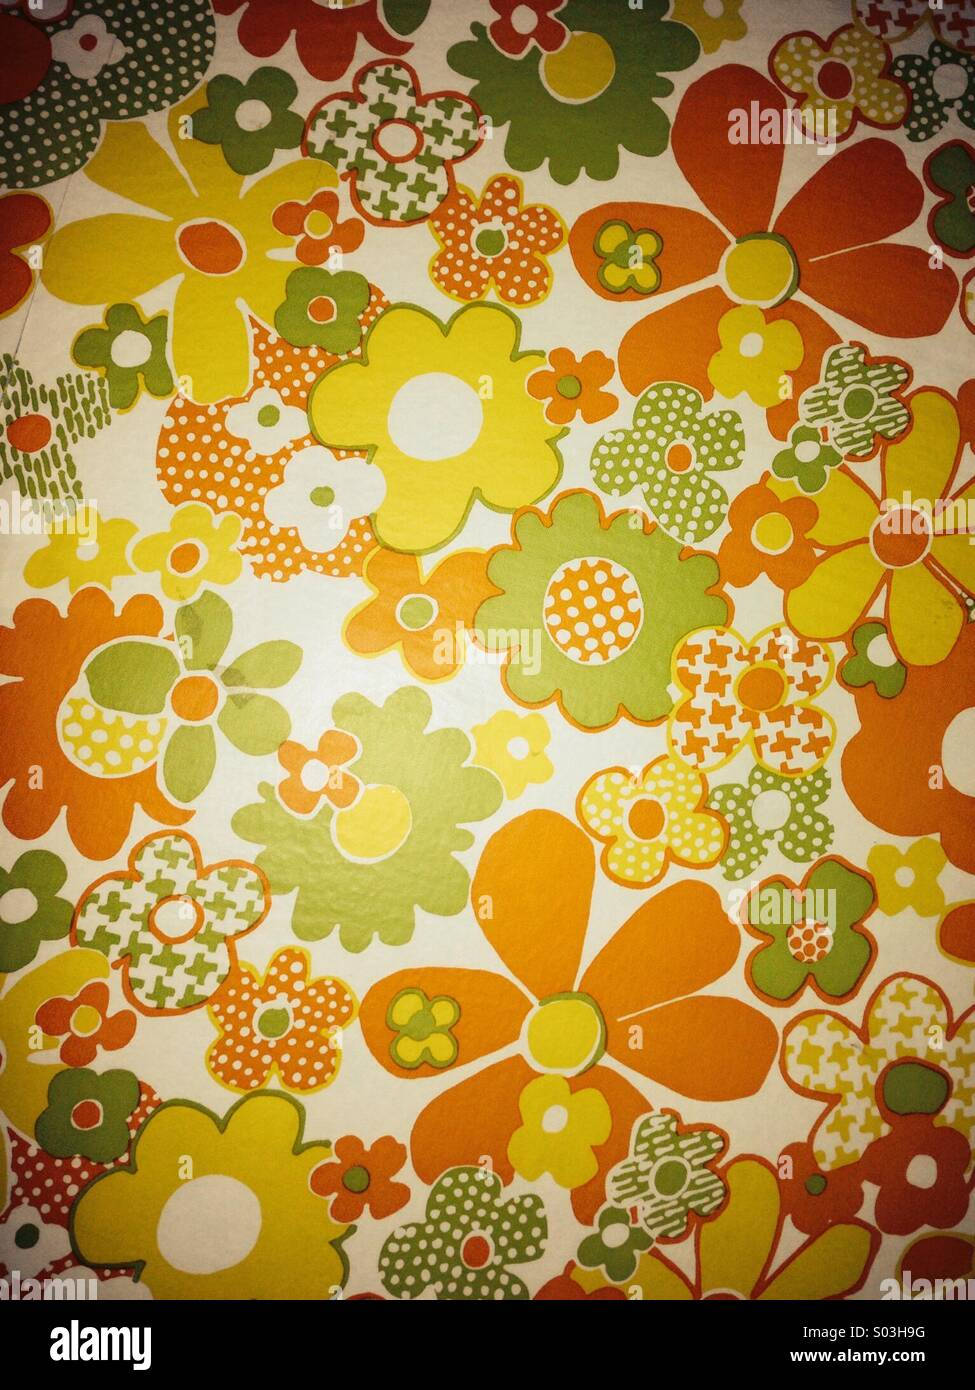 "Embrace the vintage 70s style with a fun floral pattern!" Wallpaper